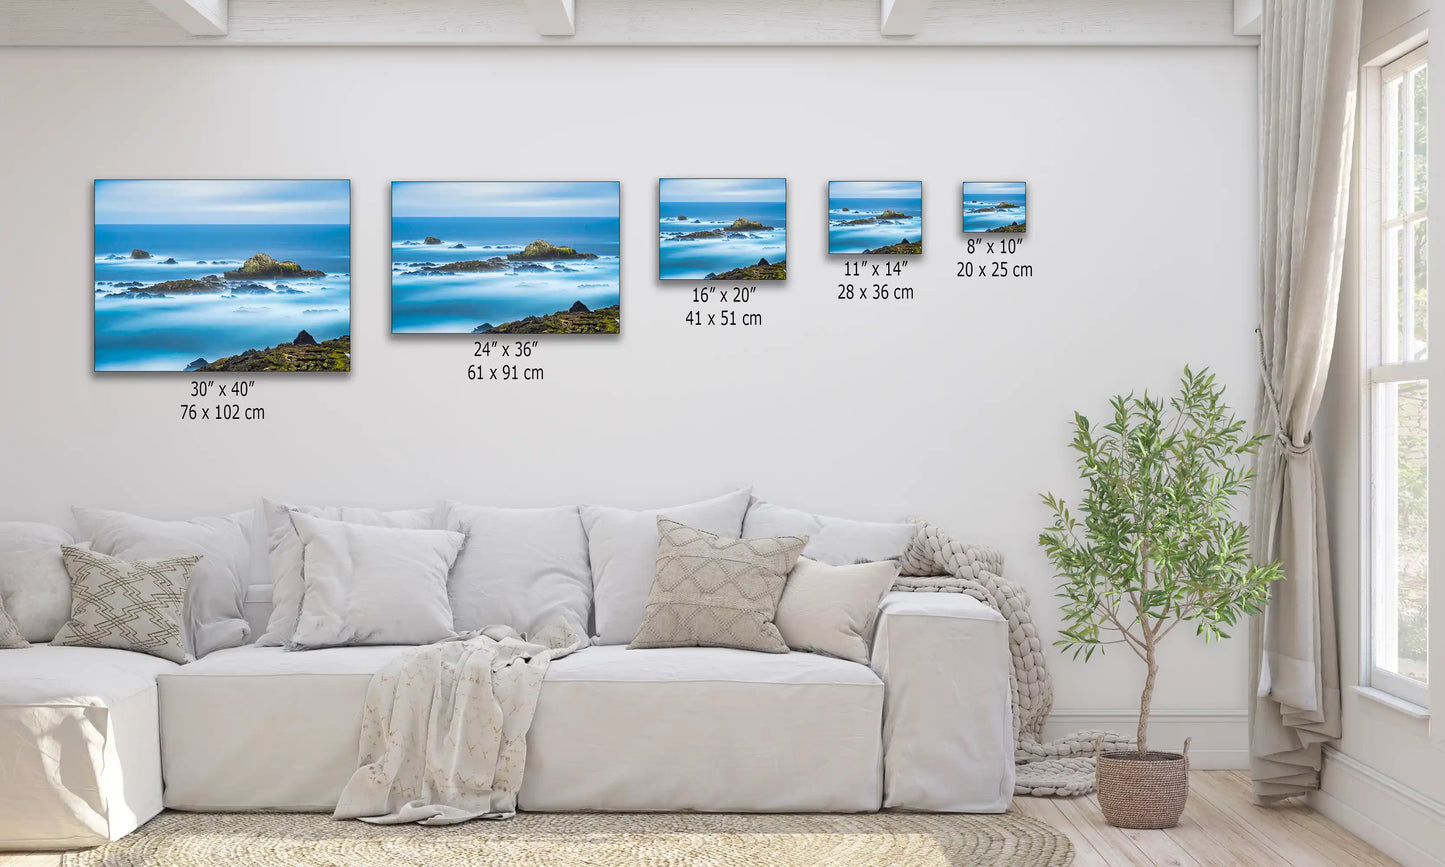 Various sized canvas prints of Point Lobos seascape displayed above a sofa, offering diverse oceanic wall art options.